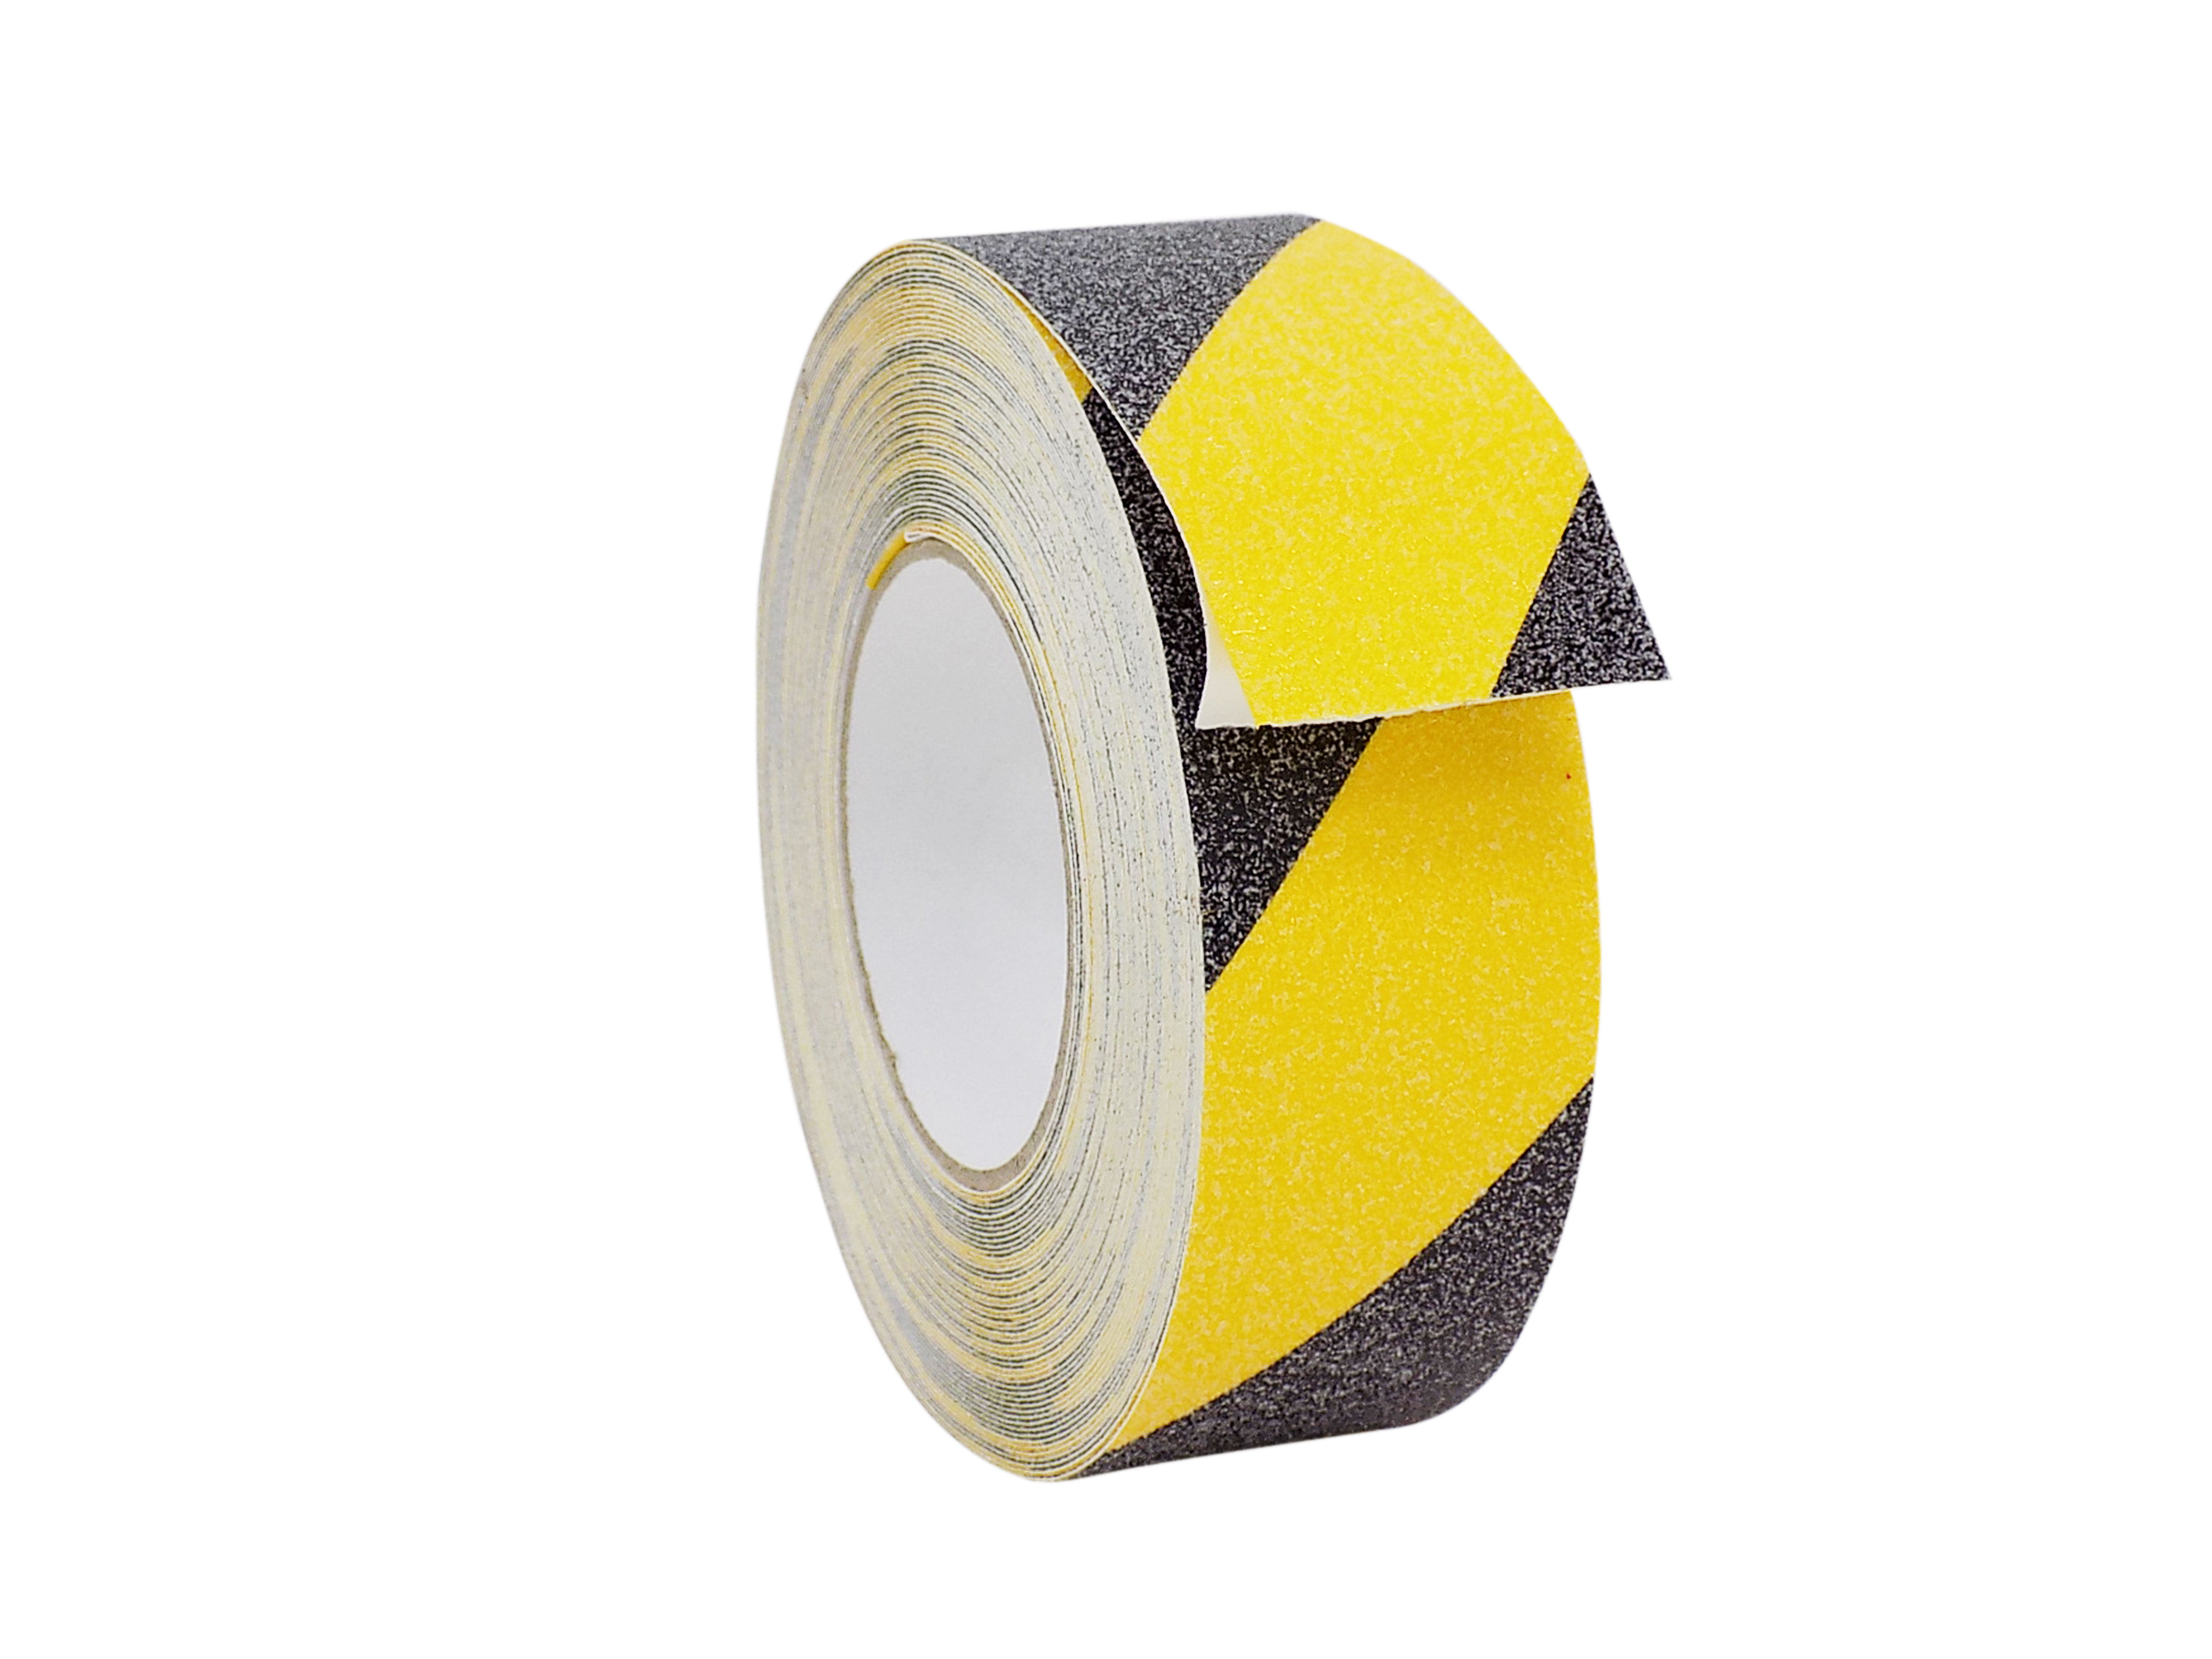 Anti Slip Tape Clear,Safety Track Skid Roll High Traction Strong Grip Abrasive X